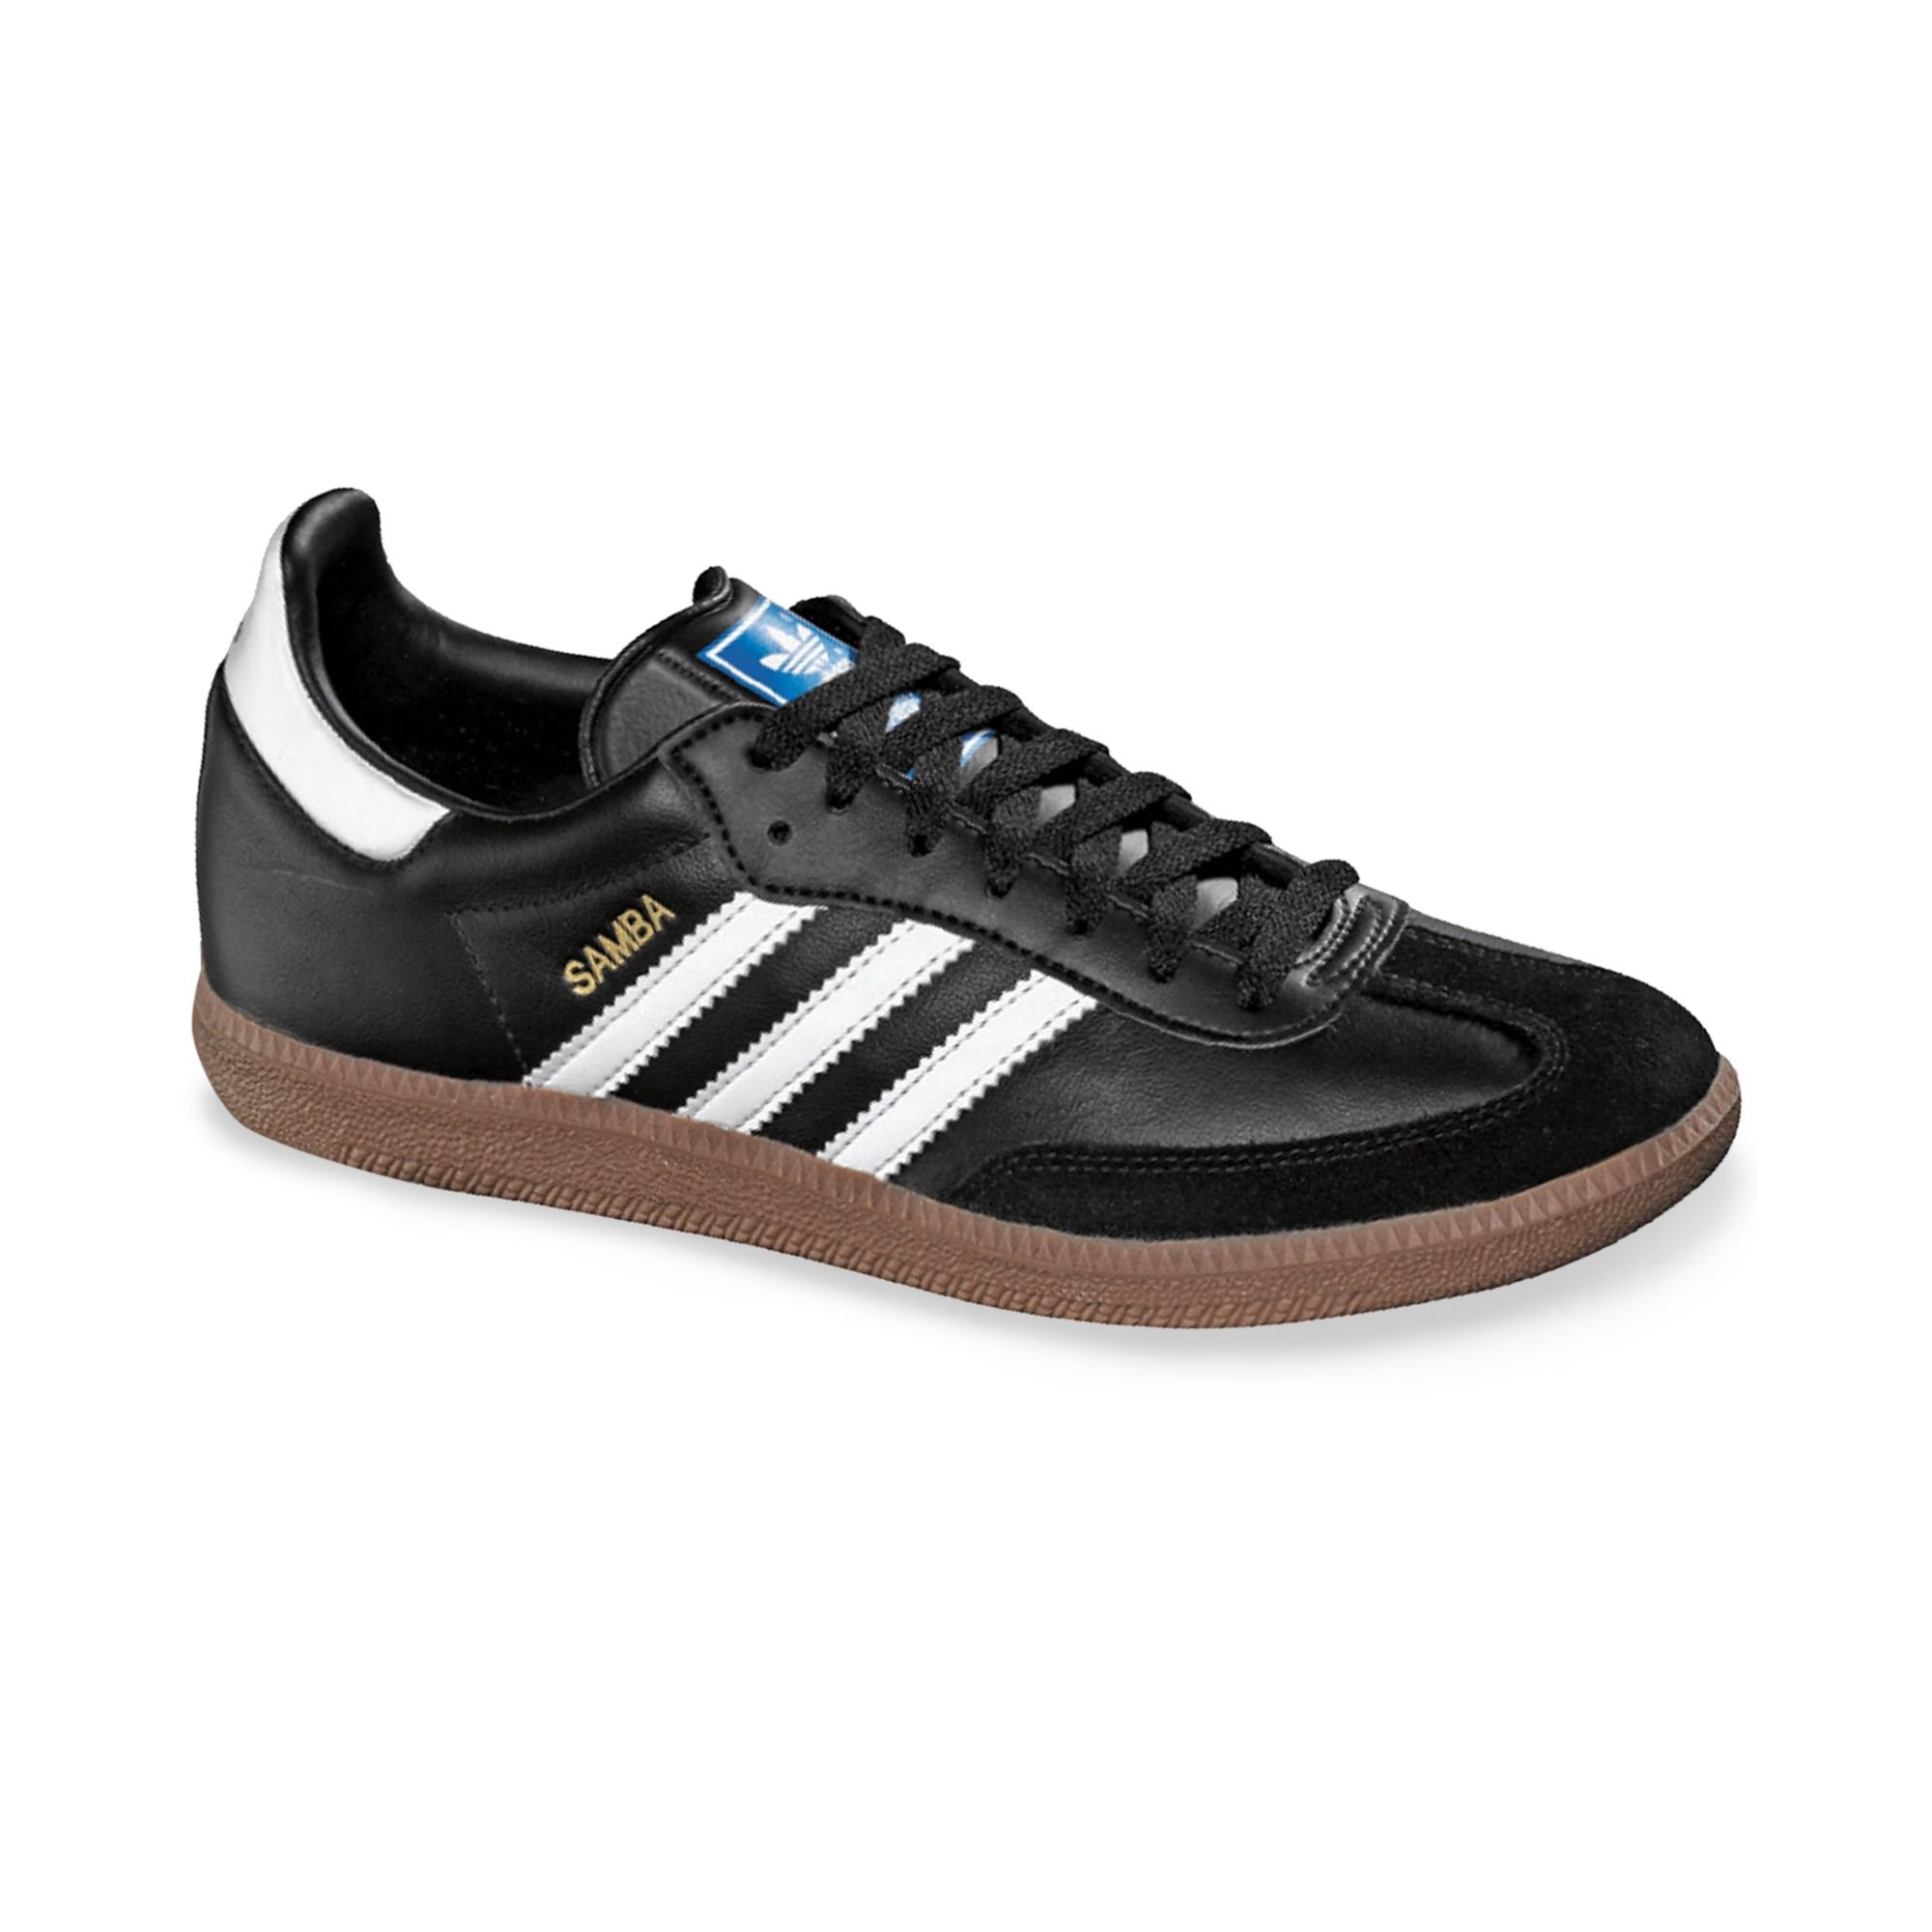 Adidas Men'S Originals Leather Samba Sneakers From Finish Line in Black ...